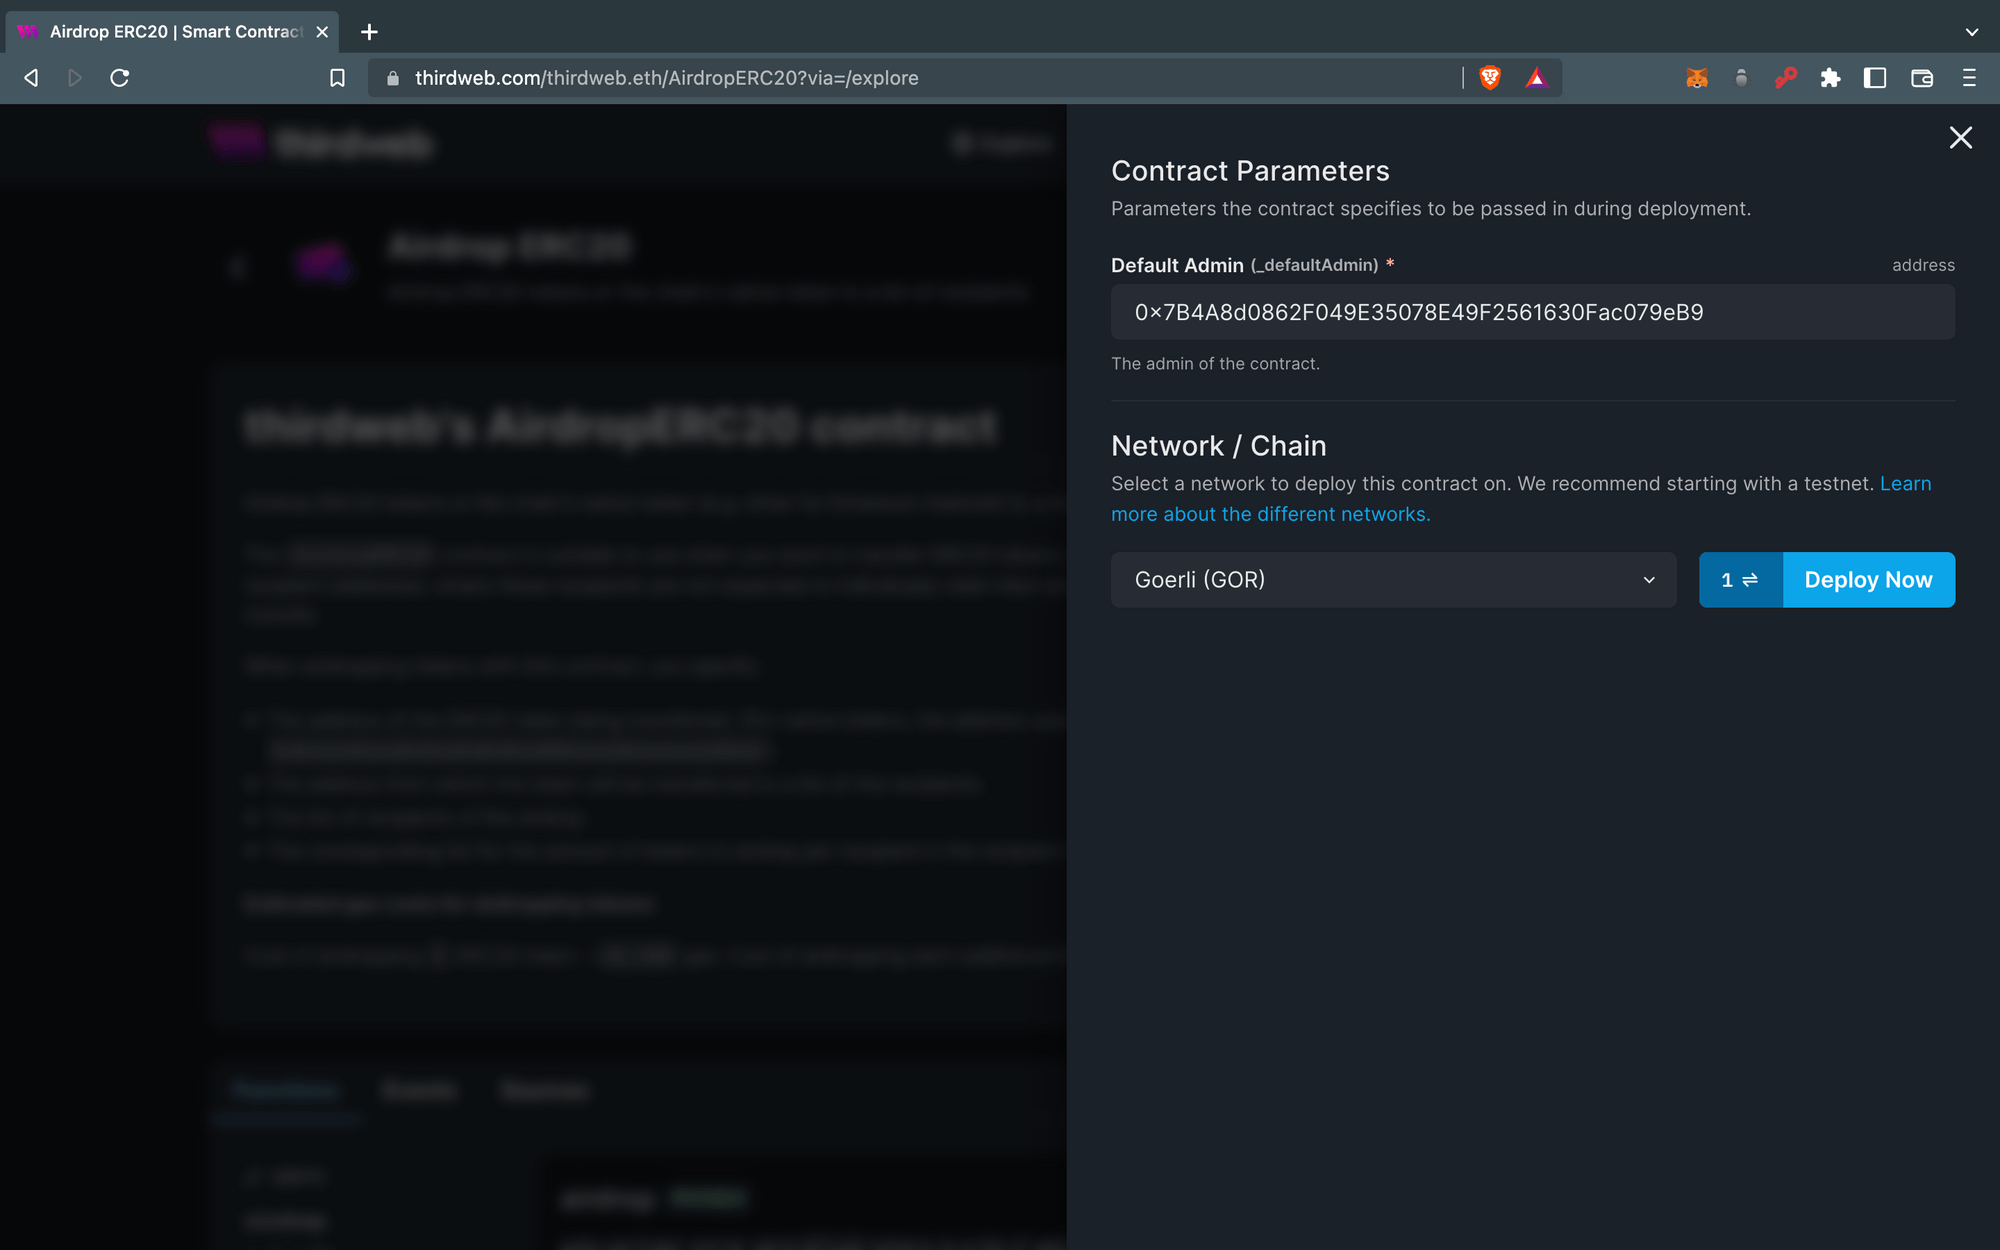 Add a default admin and deploy the contract